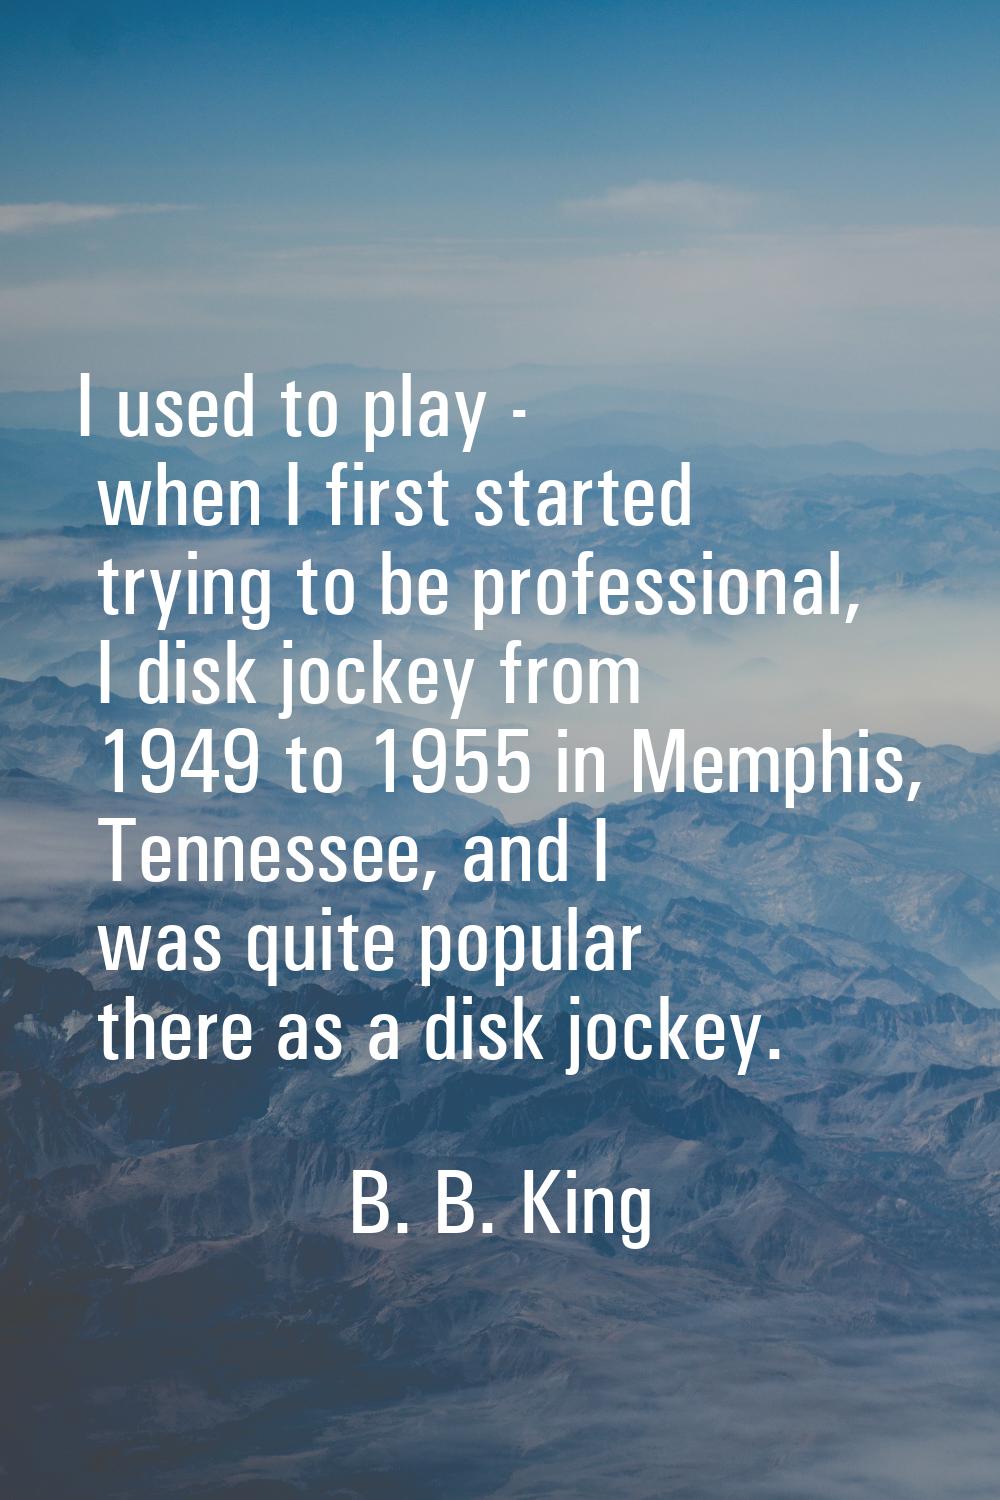 I used to play - when I first started trying to be professional, I disk jockey from 1949 to 1955 in